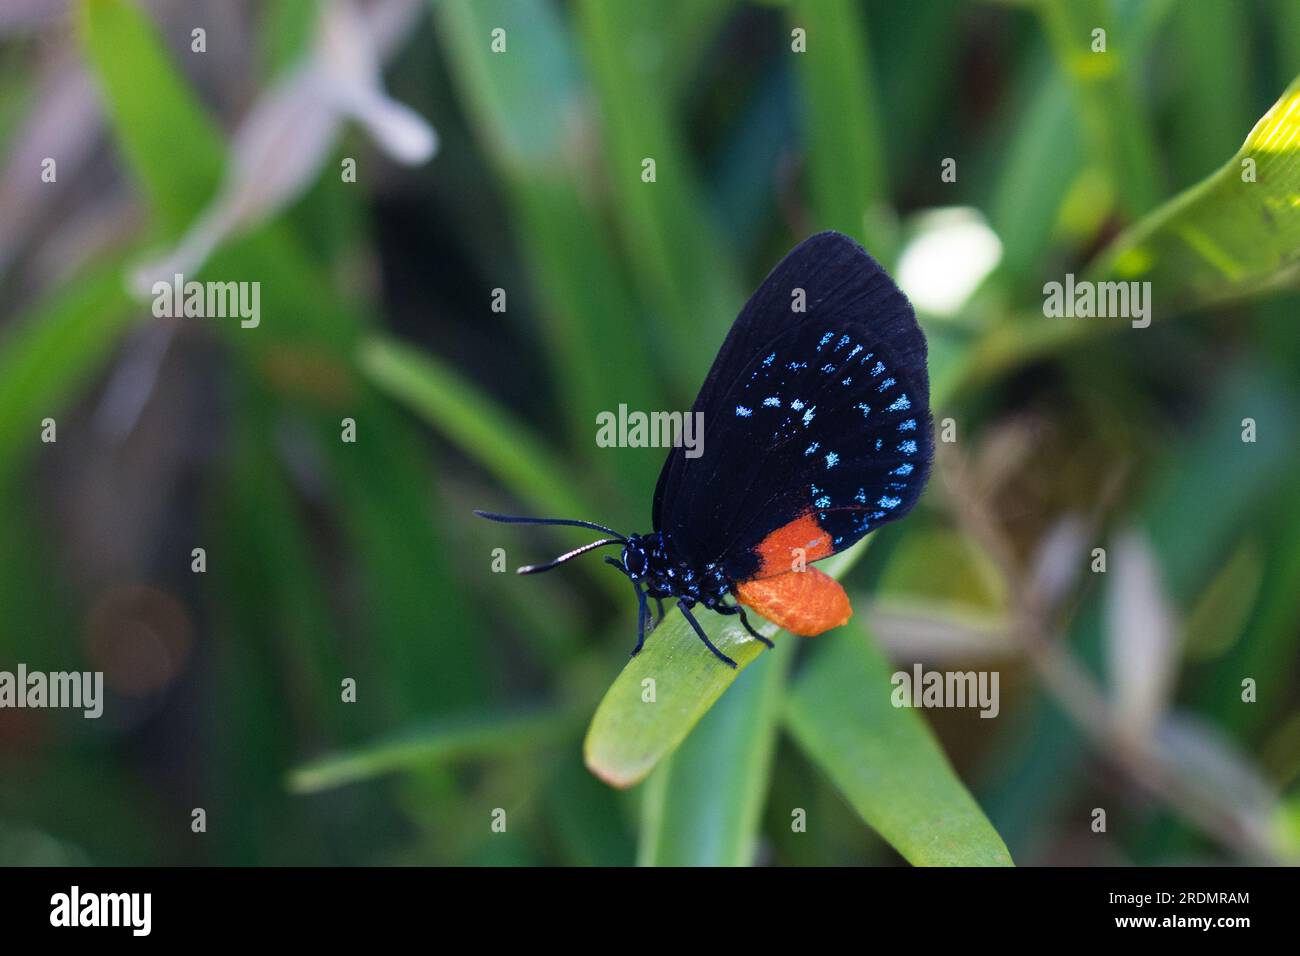 Detailed closeup of rare Atala Butterfly with black, orange, and iridescent blue markings Stock Photo